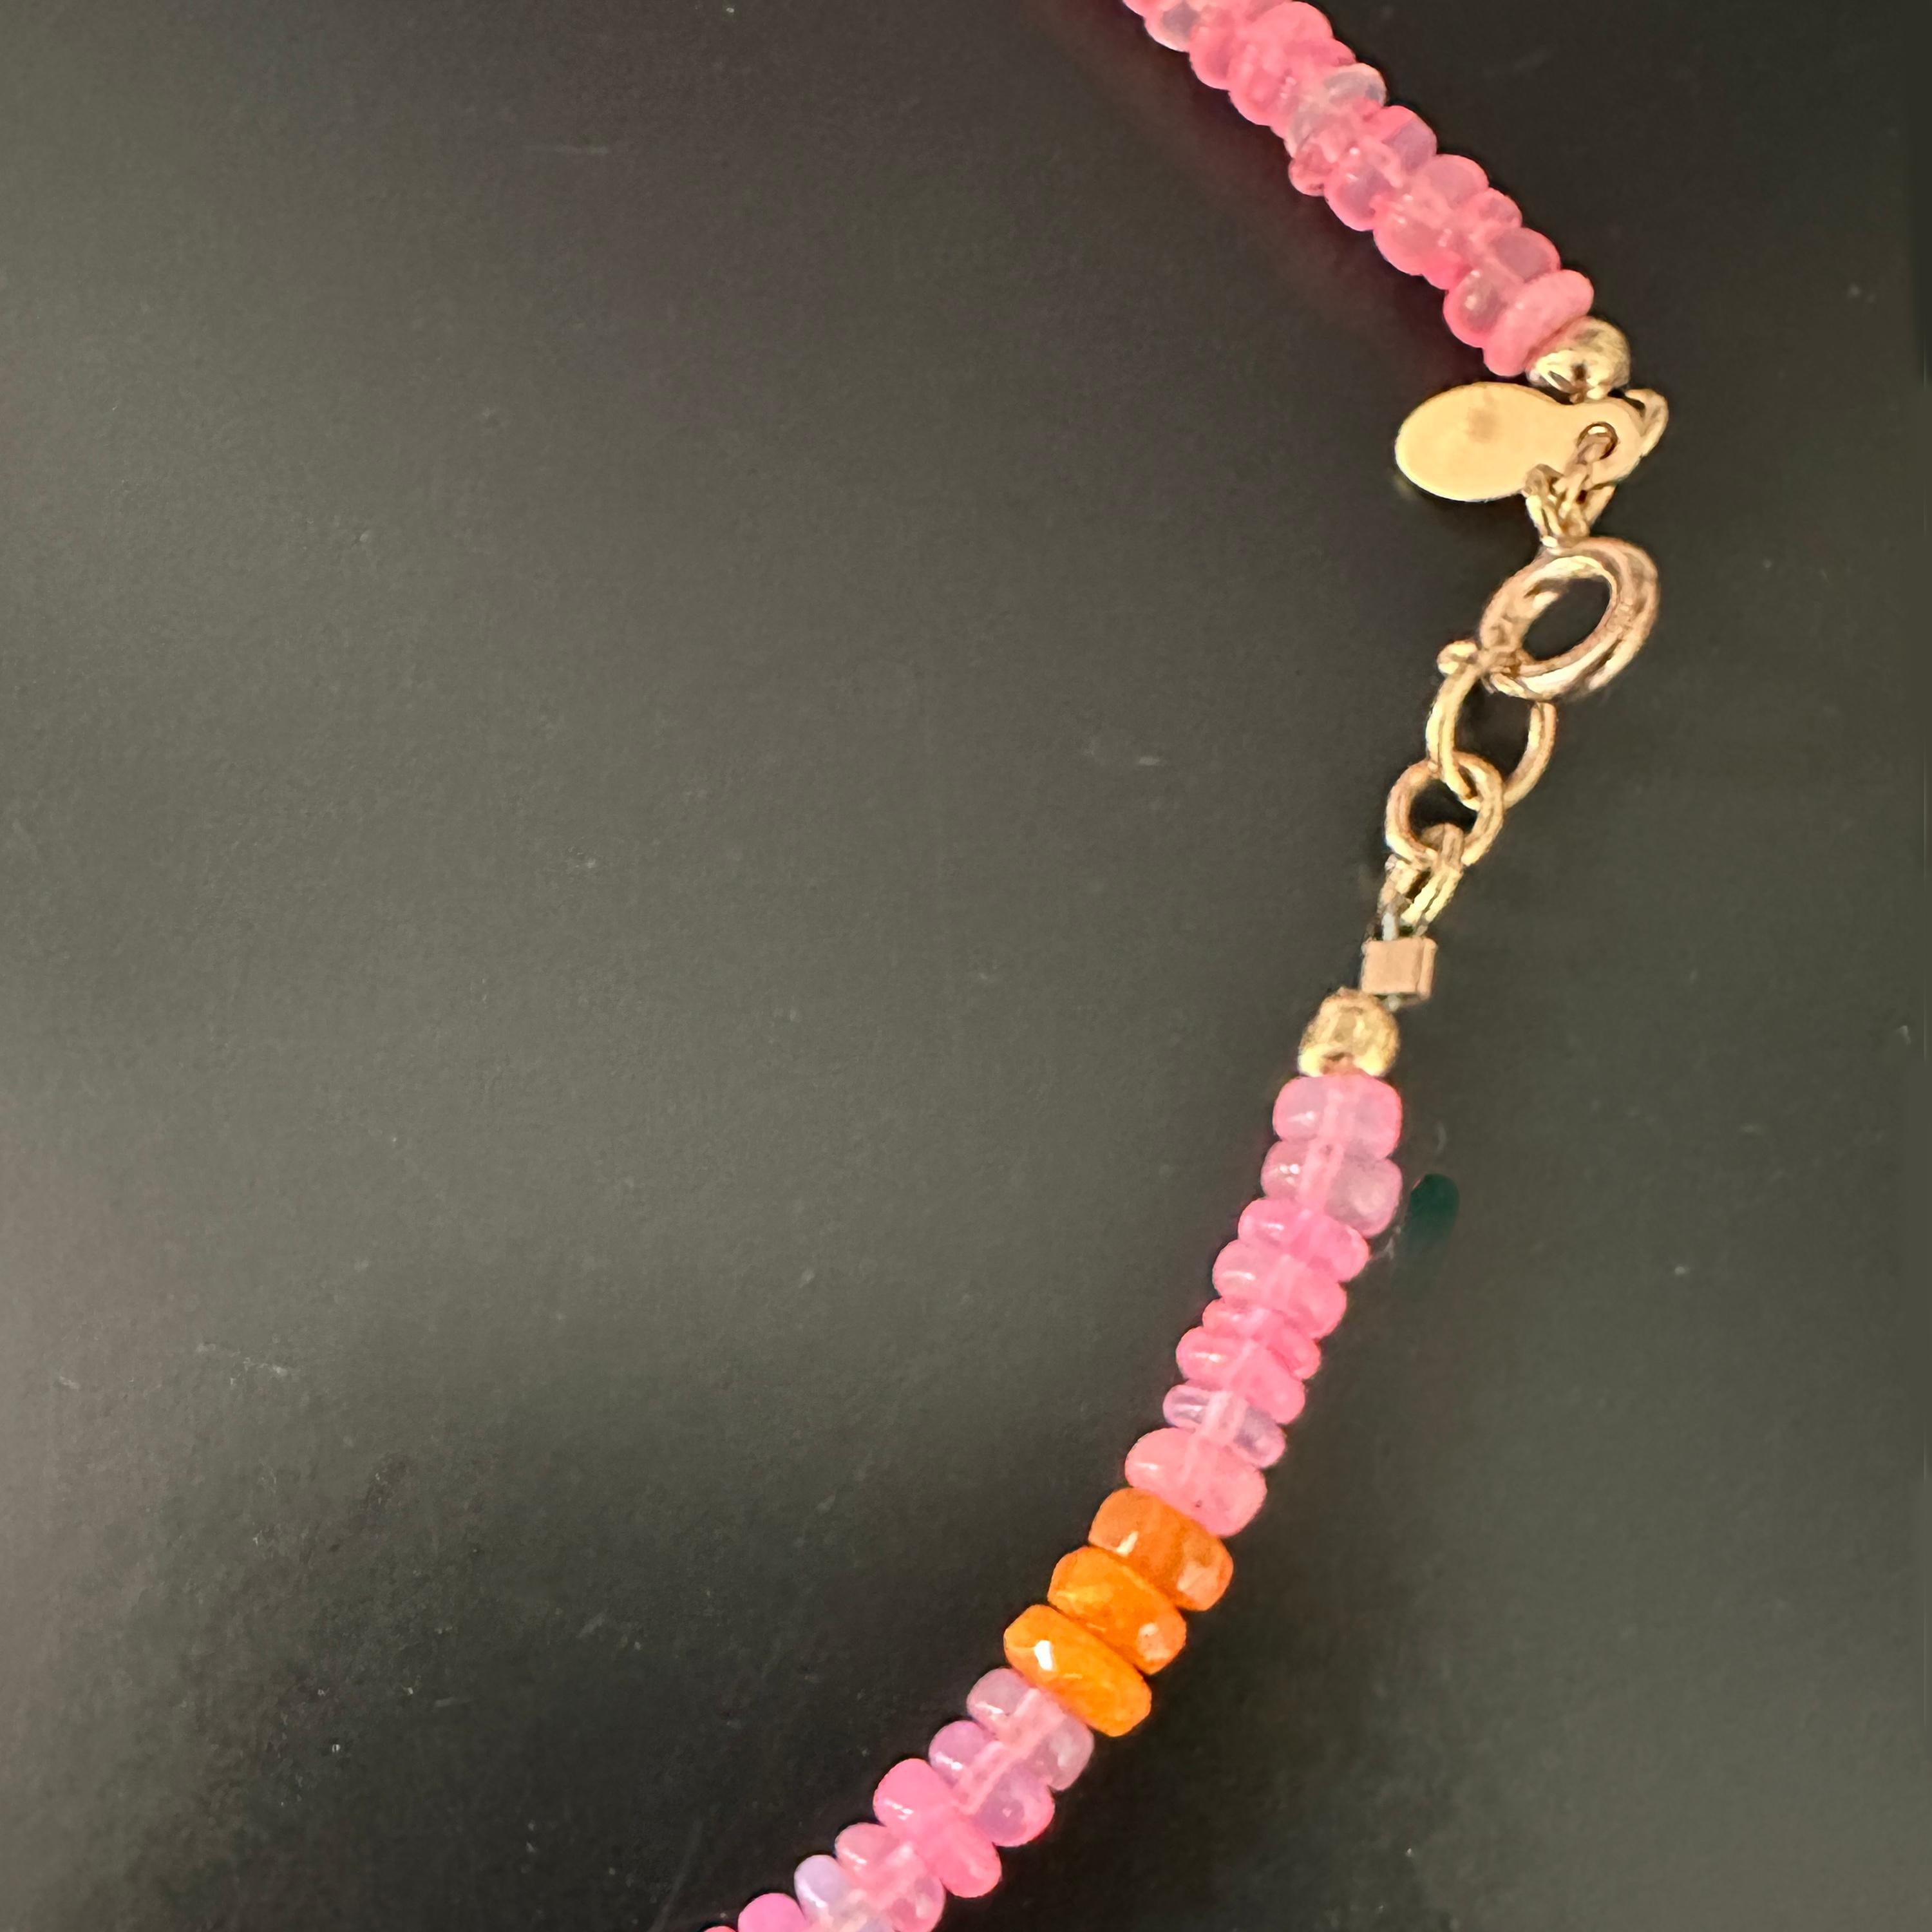 Contemporary Neon Pink Opal Choker For Sale